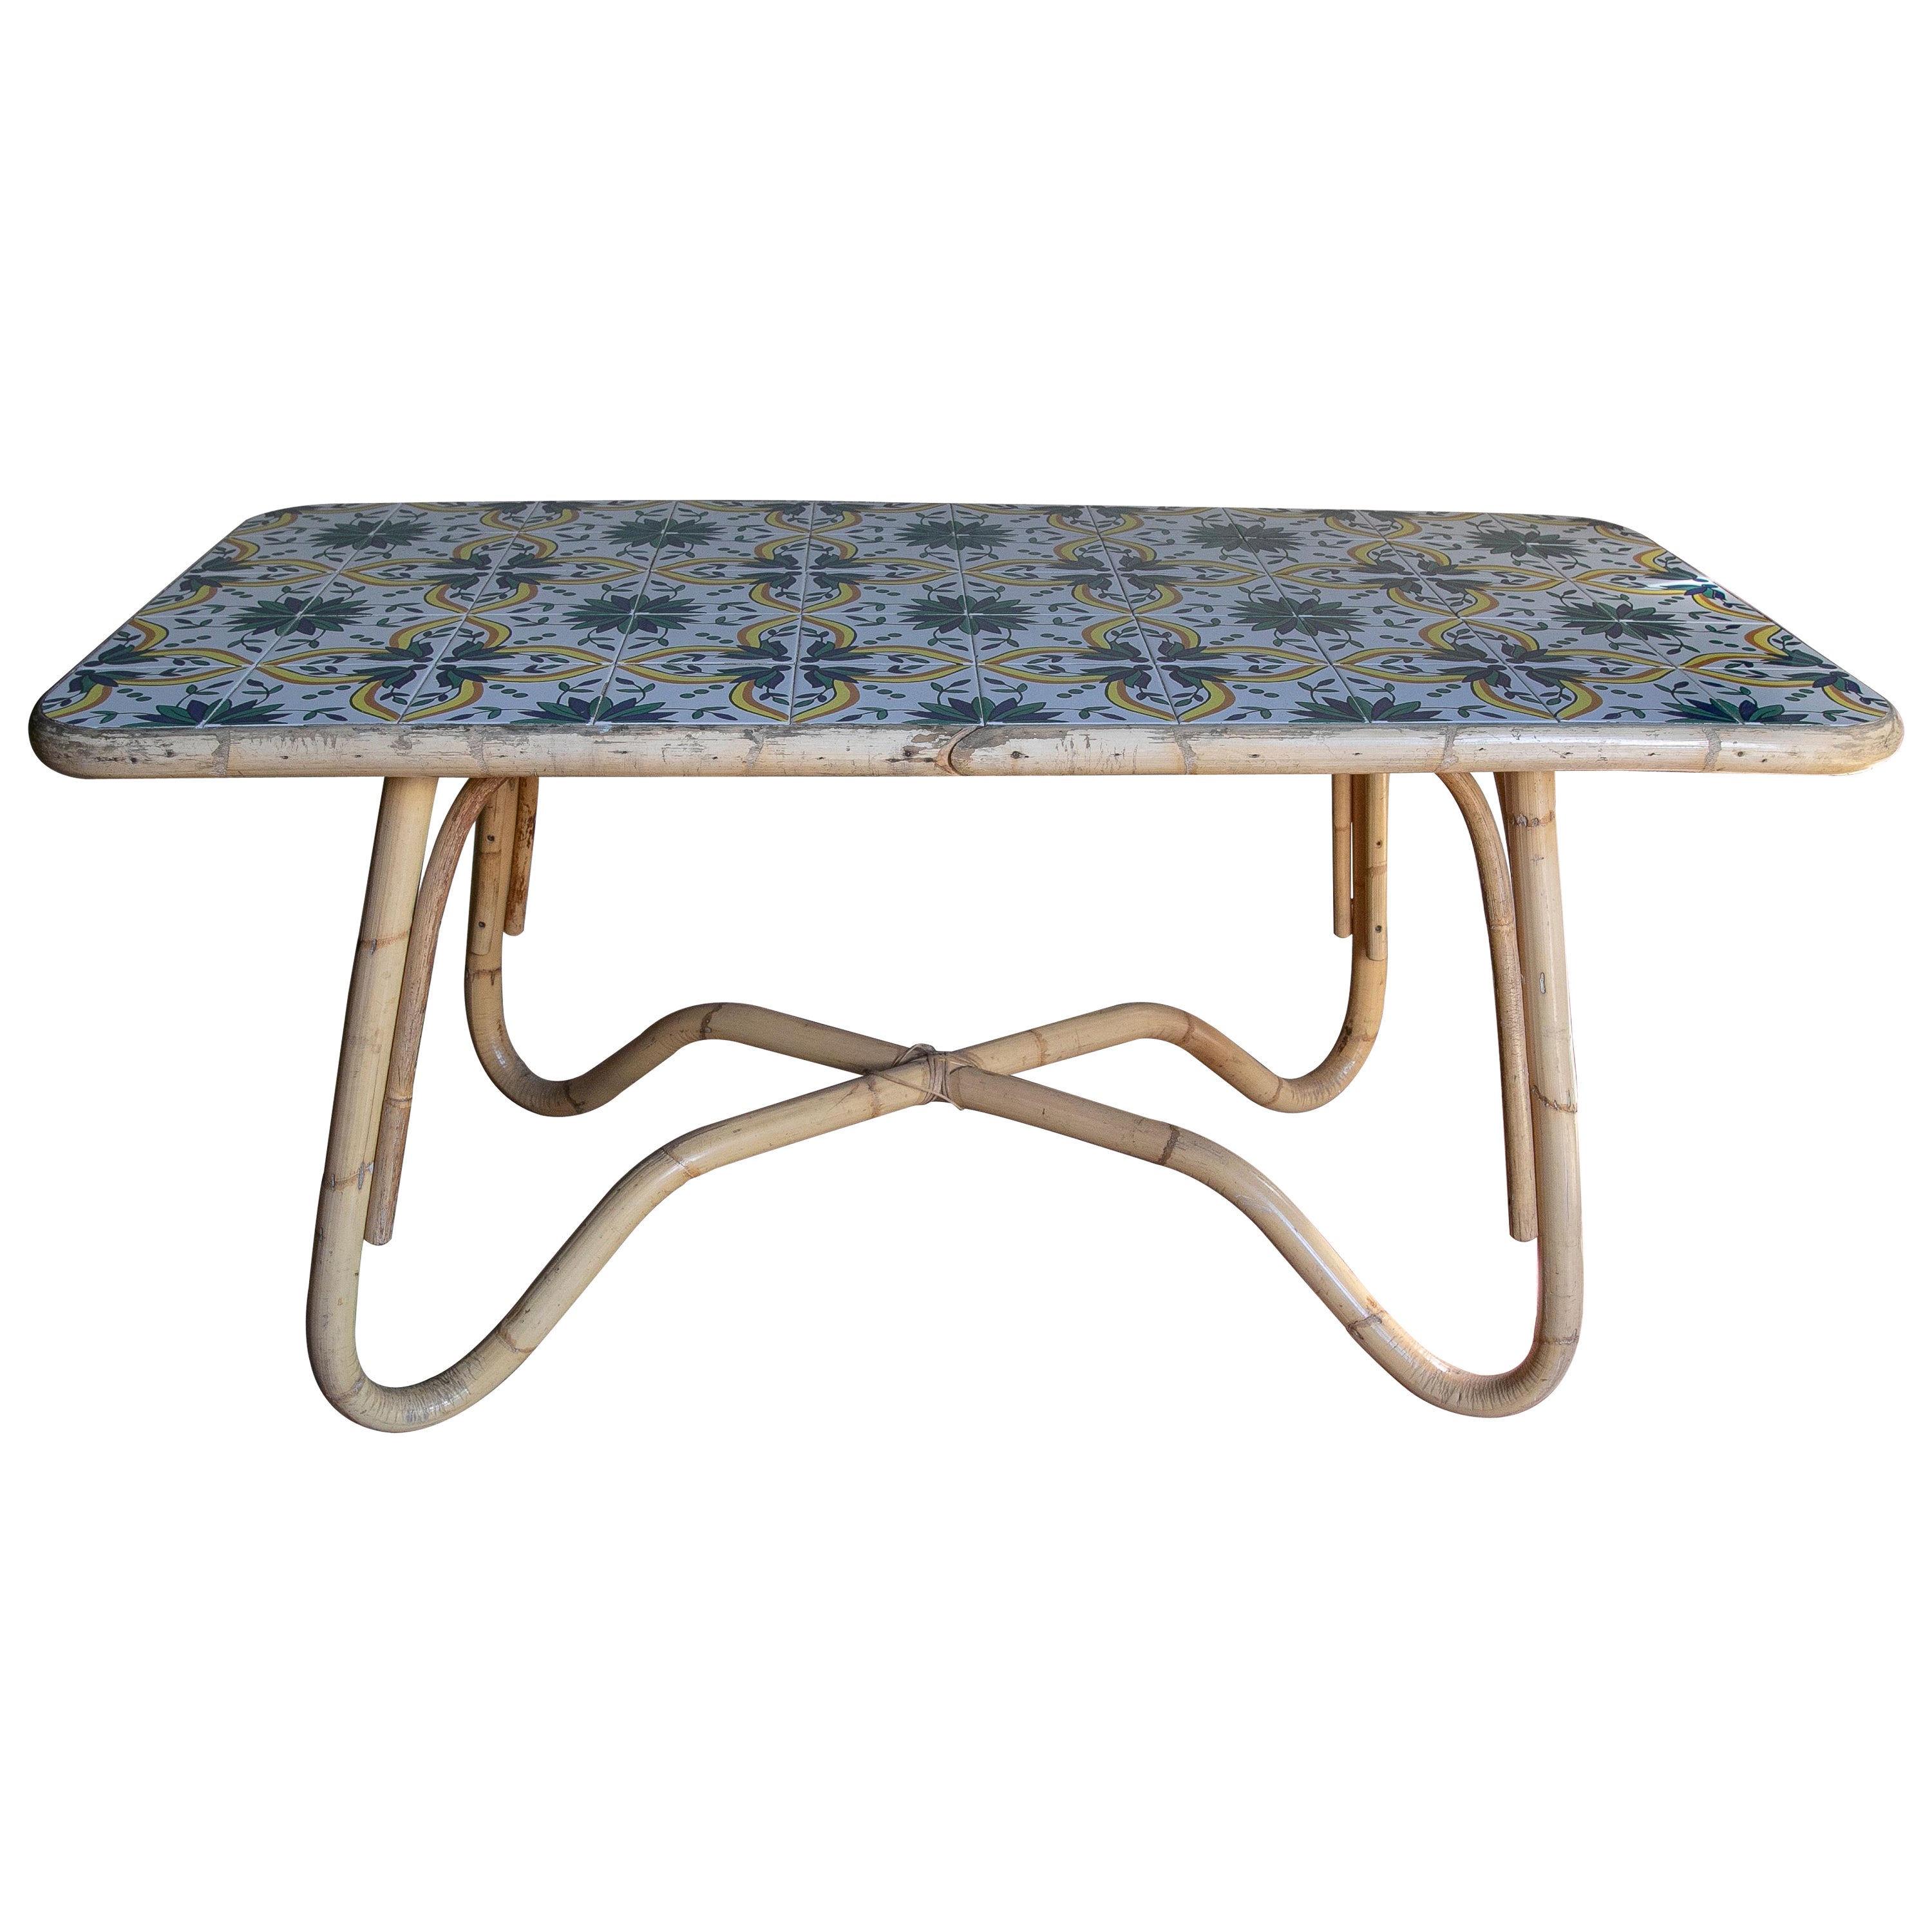 1970s Bamboo Table with Tiled Ceramic Cover  For Sale